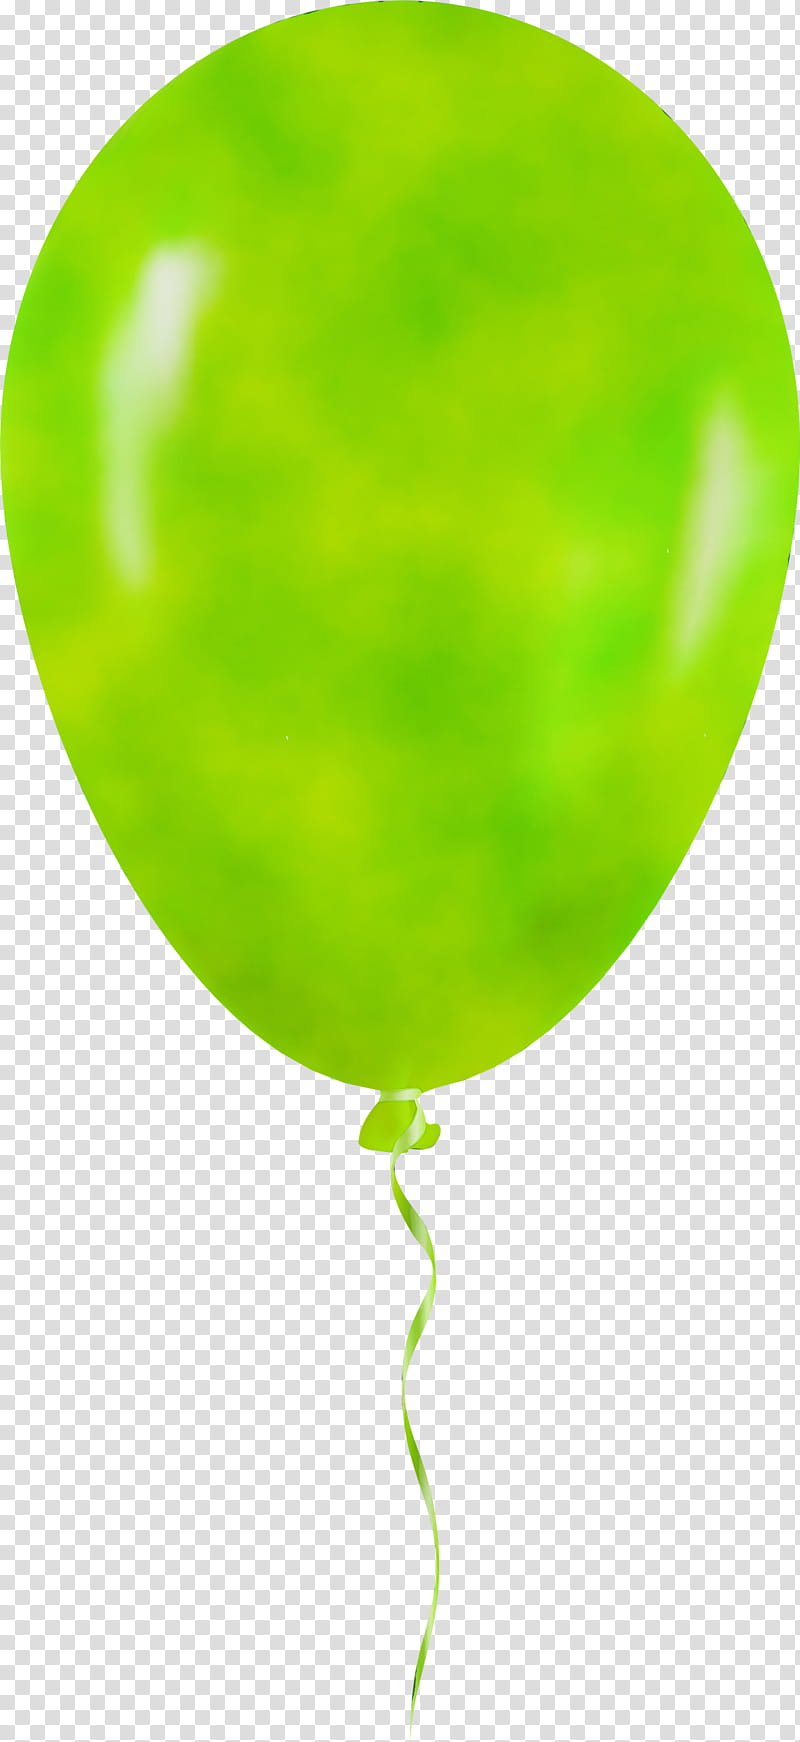 Hot Air Balloon Watercolor, Paint, Wet Ink, Green, Balloon Arch, Web Design, Leaf, Party Supply transparent background PNG clipart